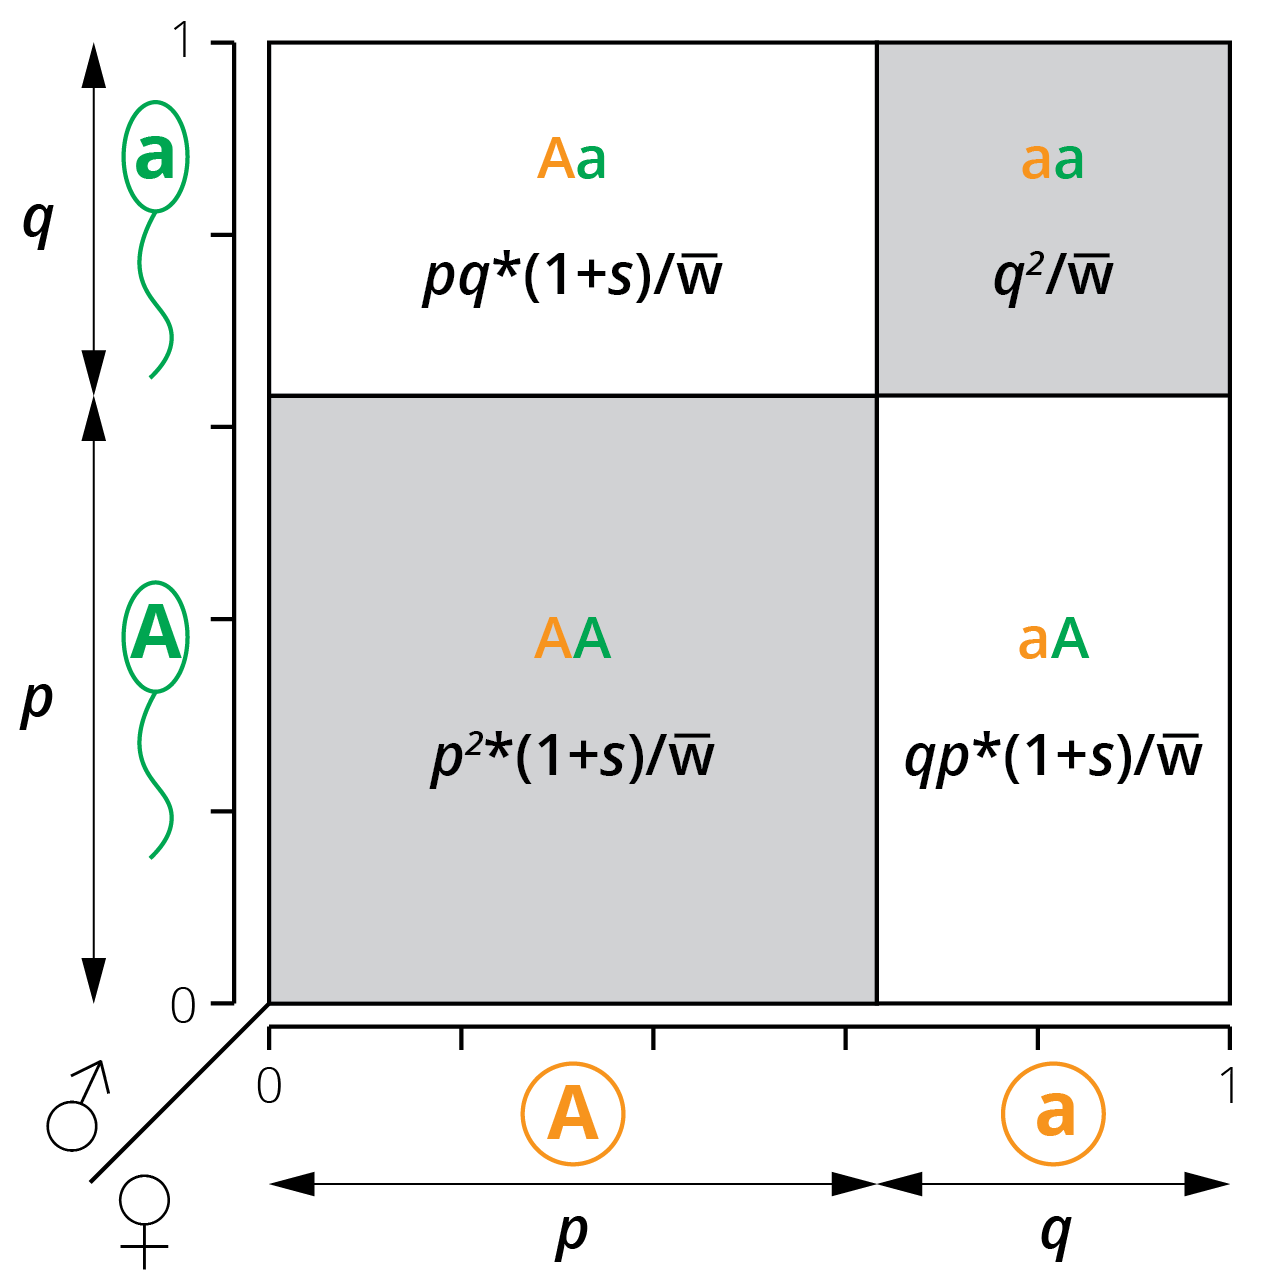 A modified Punnett square illustrates the relationship between allele frequencies (*p* and *q*) and the resulting genotype frequencies when genotypes *AA* and *Aa* have a different fitness than *aa*.